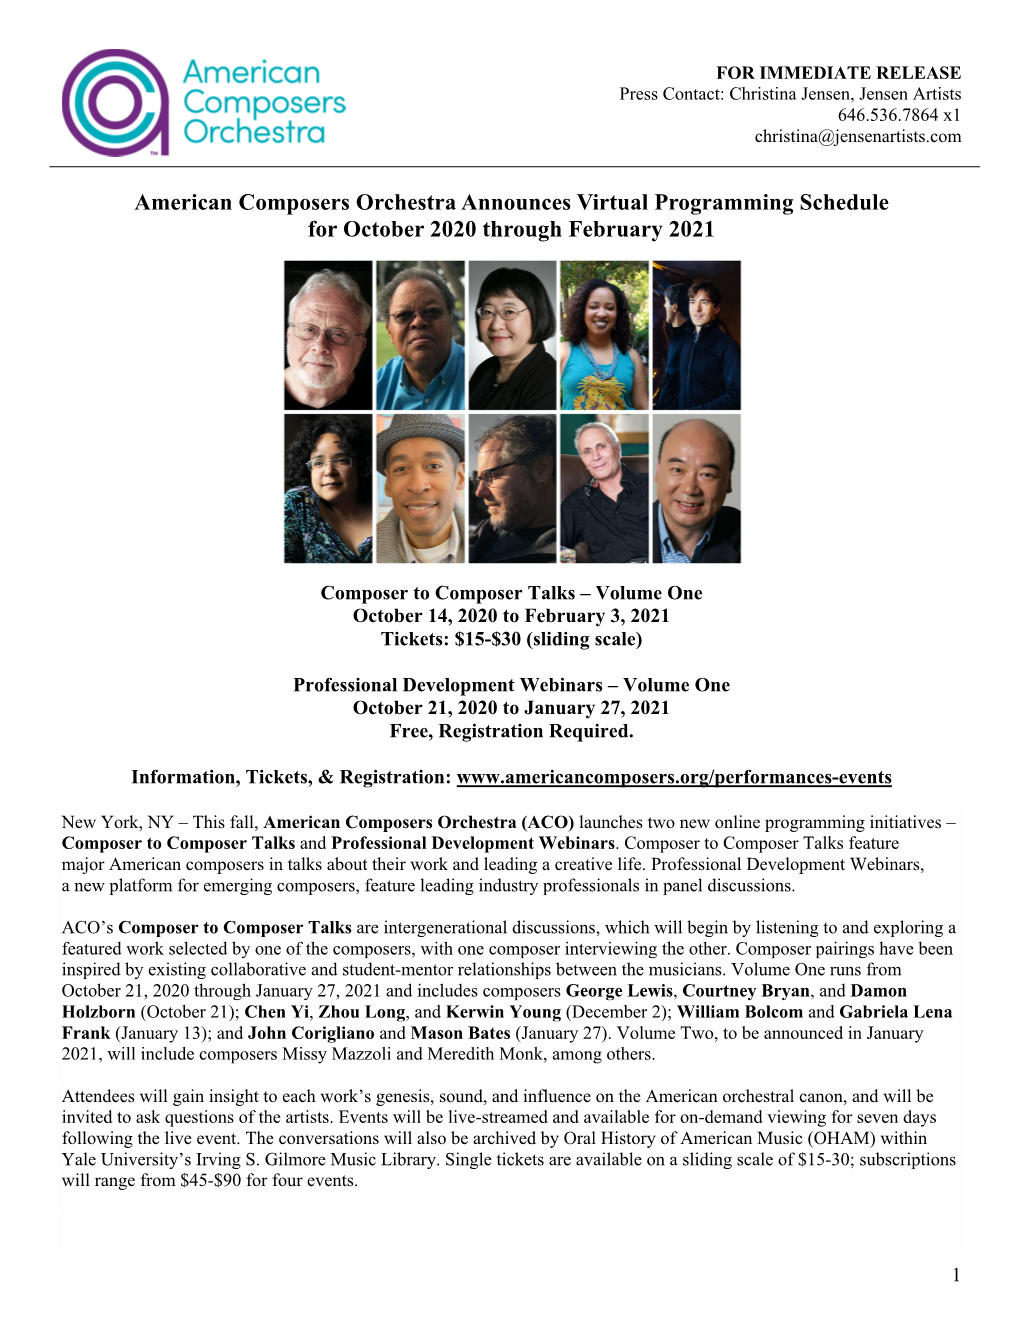 American Composers Orchestra Announces Virtual Programming Schedule for October 2020 Through February 2021